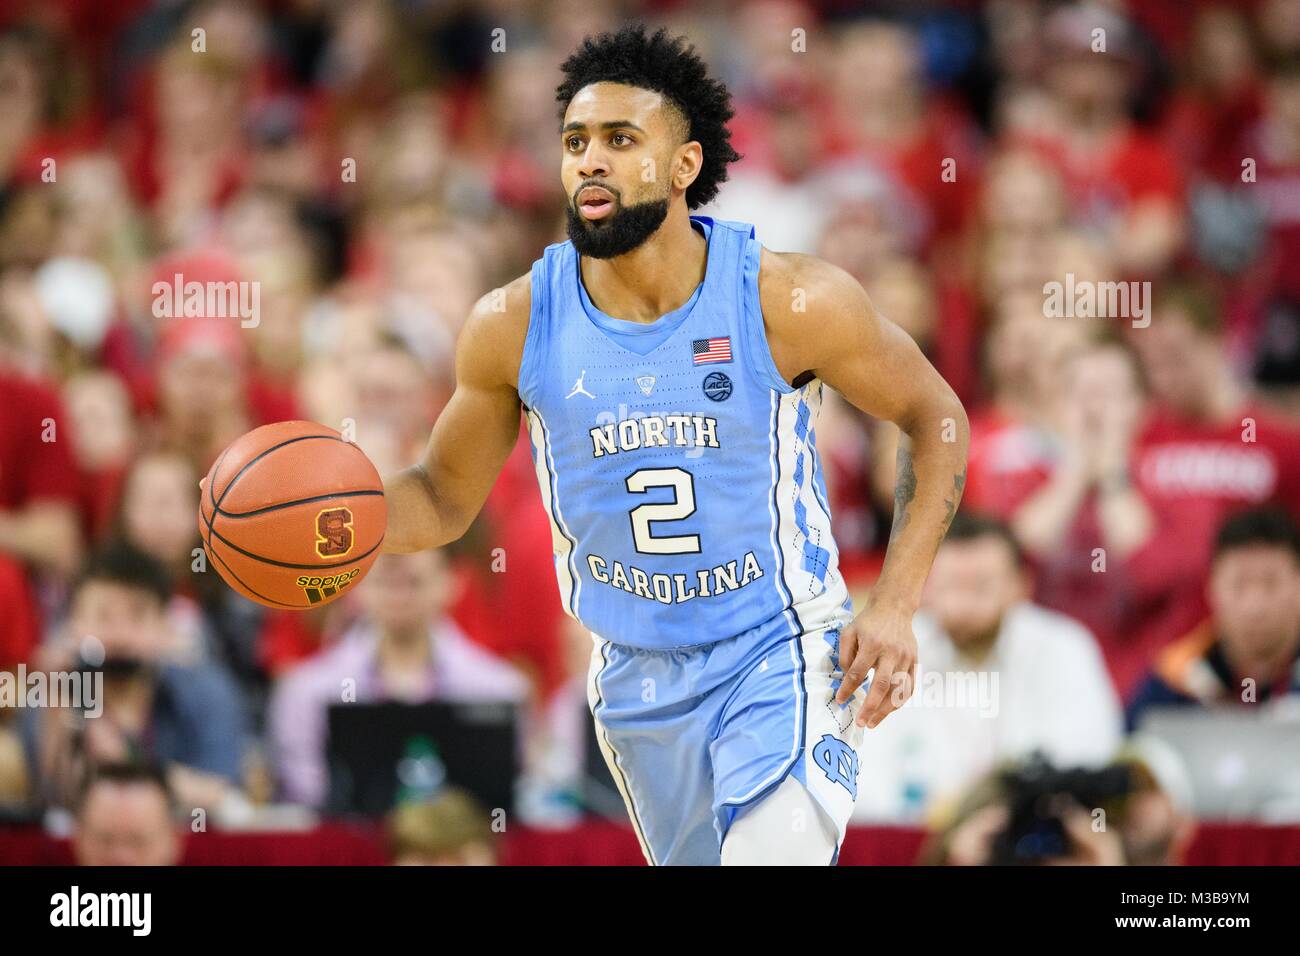 North Carolina Tar Heels guard Joel Berry II (2) during the NCAA College Basketball game between the North Carolina Tar Heels and the NC State Wolfpack at PNC Arena on Saturday February 10, 2018 in Raleigh, NC. Jacob Kupferman/CSM Stock Photo